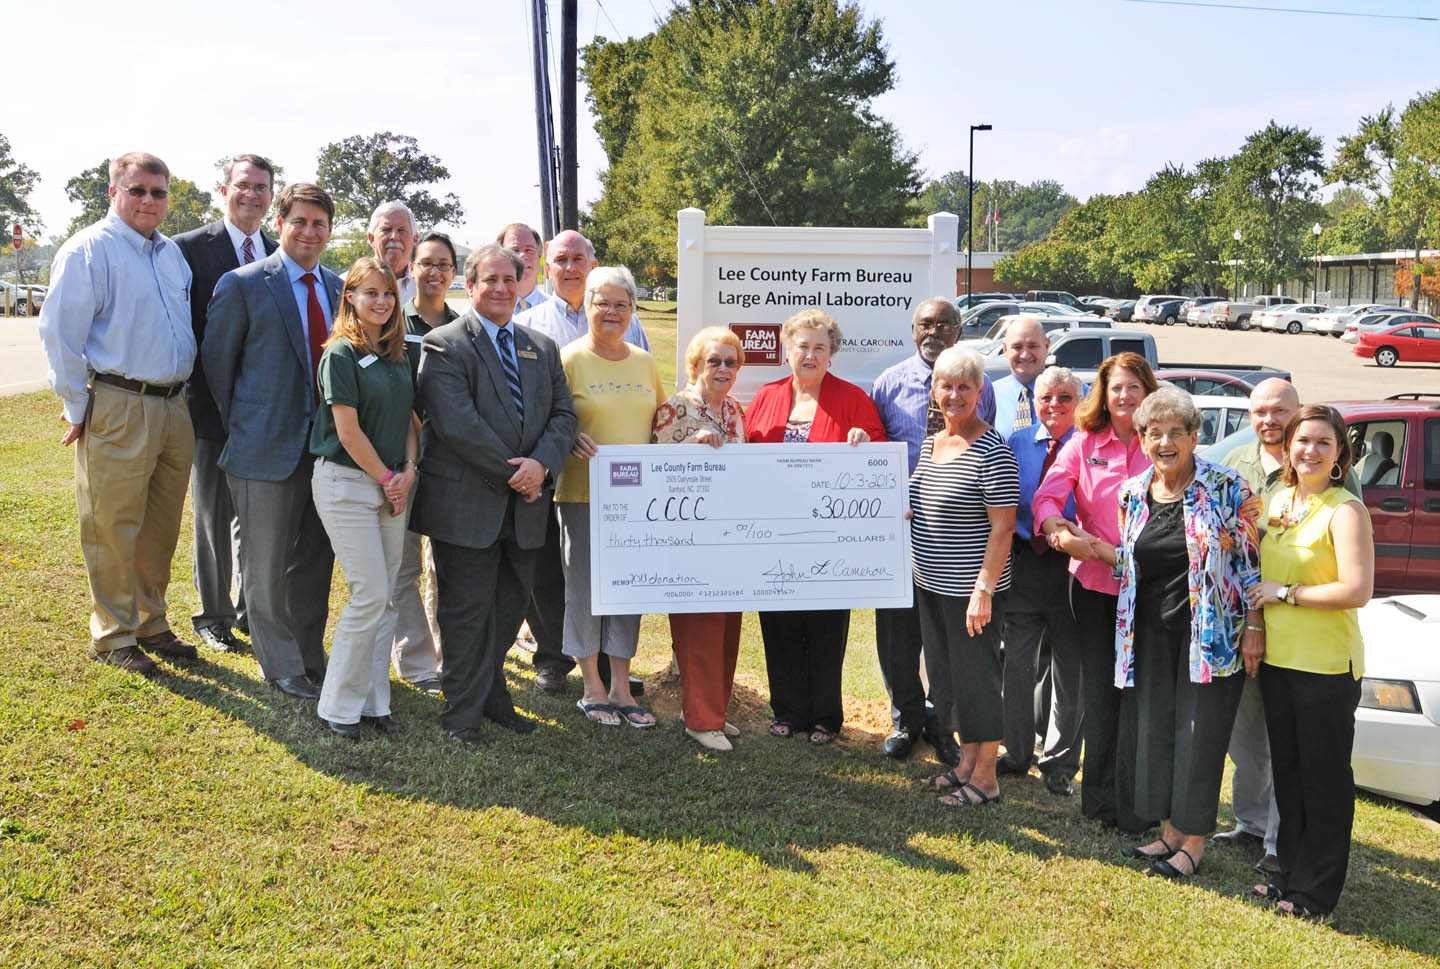 Click to enlarge,  Members of the Lee County Farm Bureau, CCCC administrators, and Veterinary Medical Technology instructors and students gathered at the college's Lee County Campus Oct. 3 for the presentation of a $30,000 check by the Bureau to the CCCC Foundation for the VMT Department. The department will use the funds to buy an endoscope and imaging equipment. For more information about the VMT program at CCCC, visit www.cccc.edu and click on "Veterinary Medical Technology" in the "A-Z Index," or contact Dr. Kim Browning at 919-718-7393 or e-mail her atkbrowning@cccc.edu.  